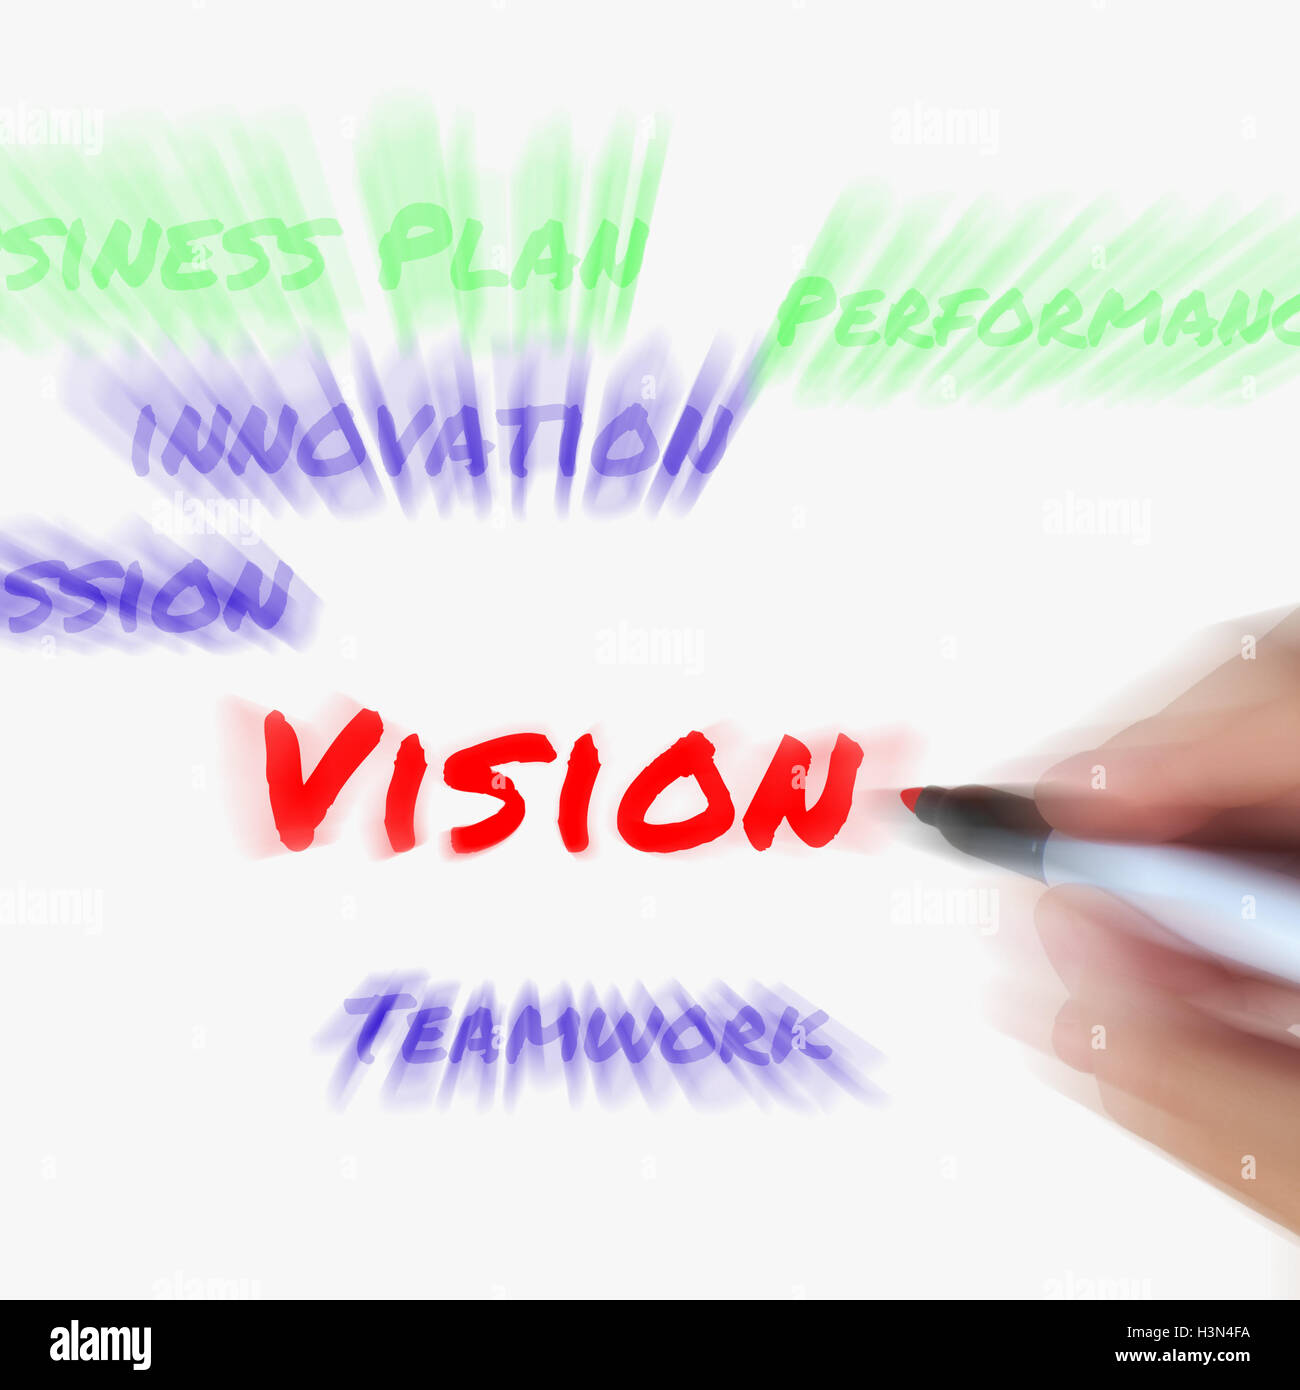 Vision on Whiteboard Displays Ingenuity Visionary and Goals Stock Photo